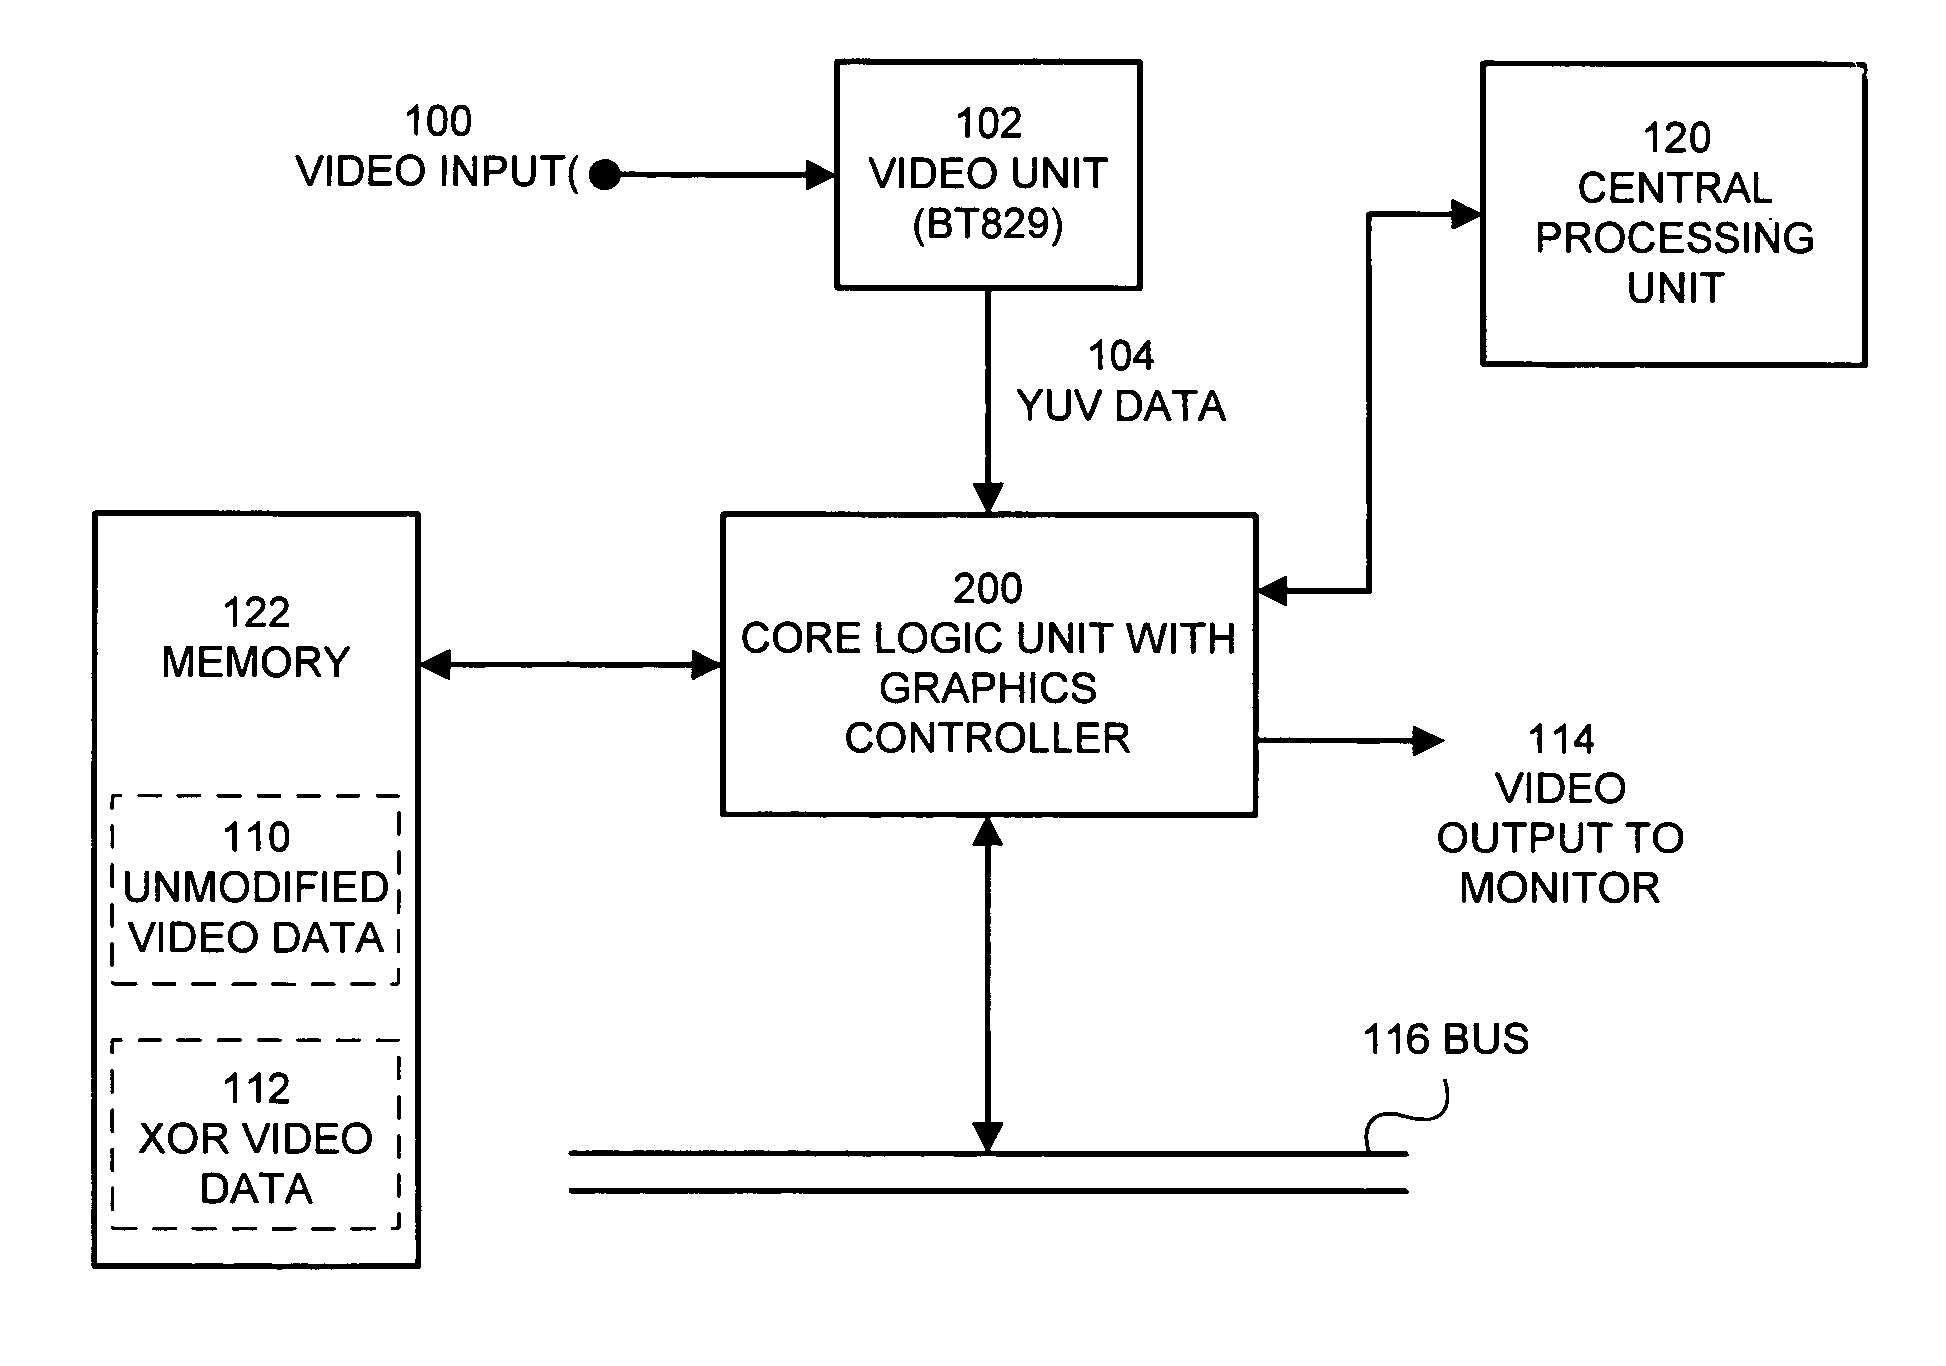 Method for assisting video compression in a computer system